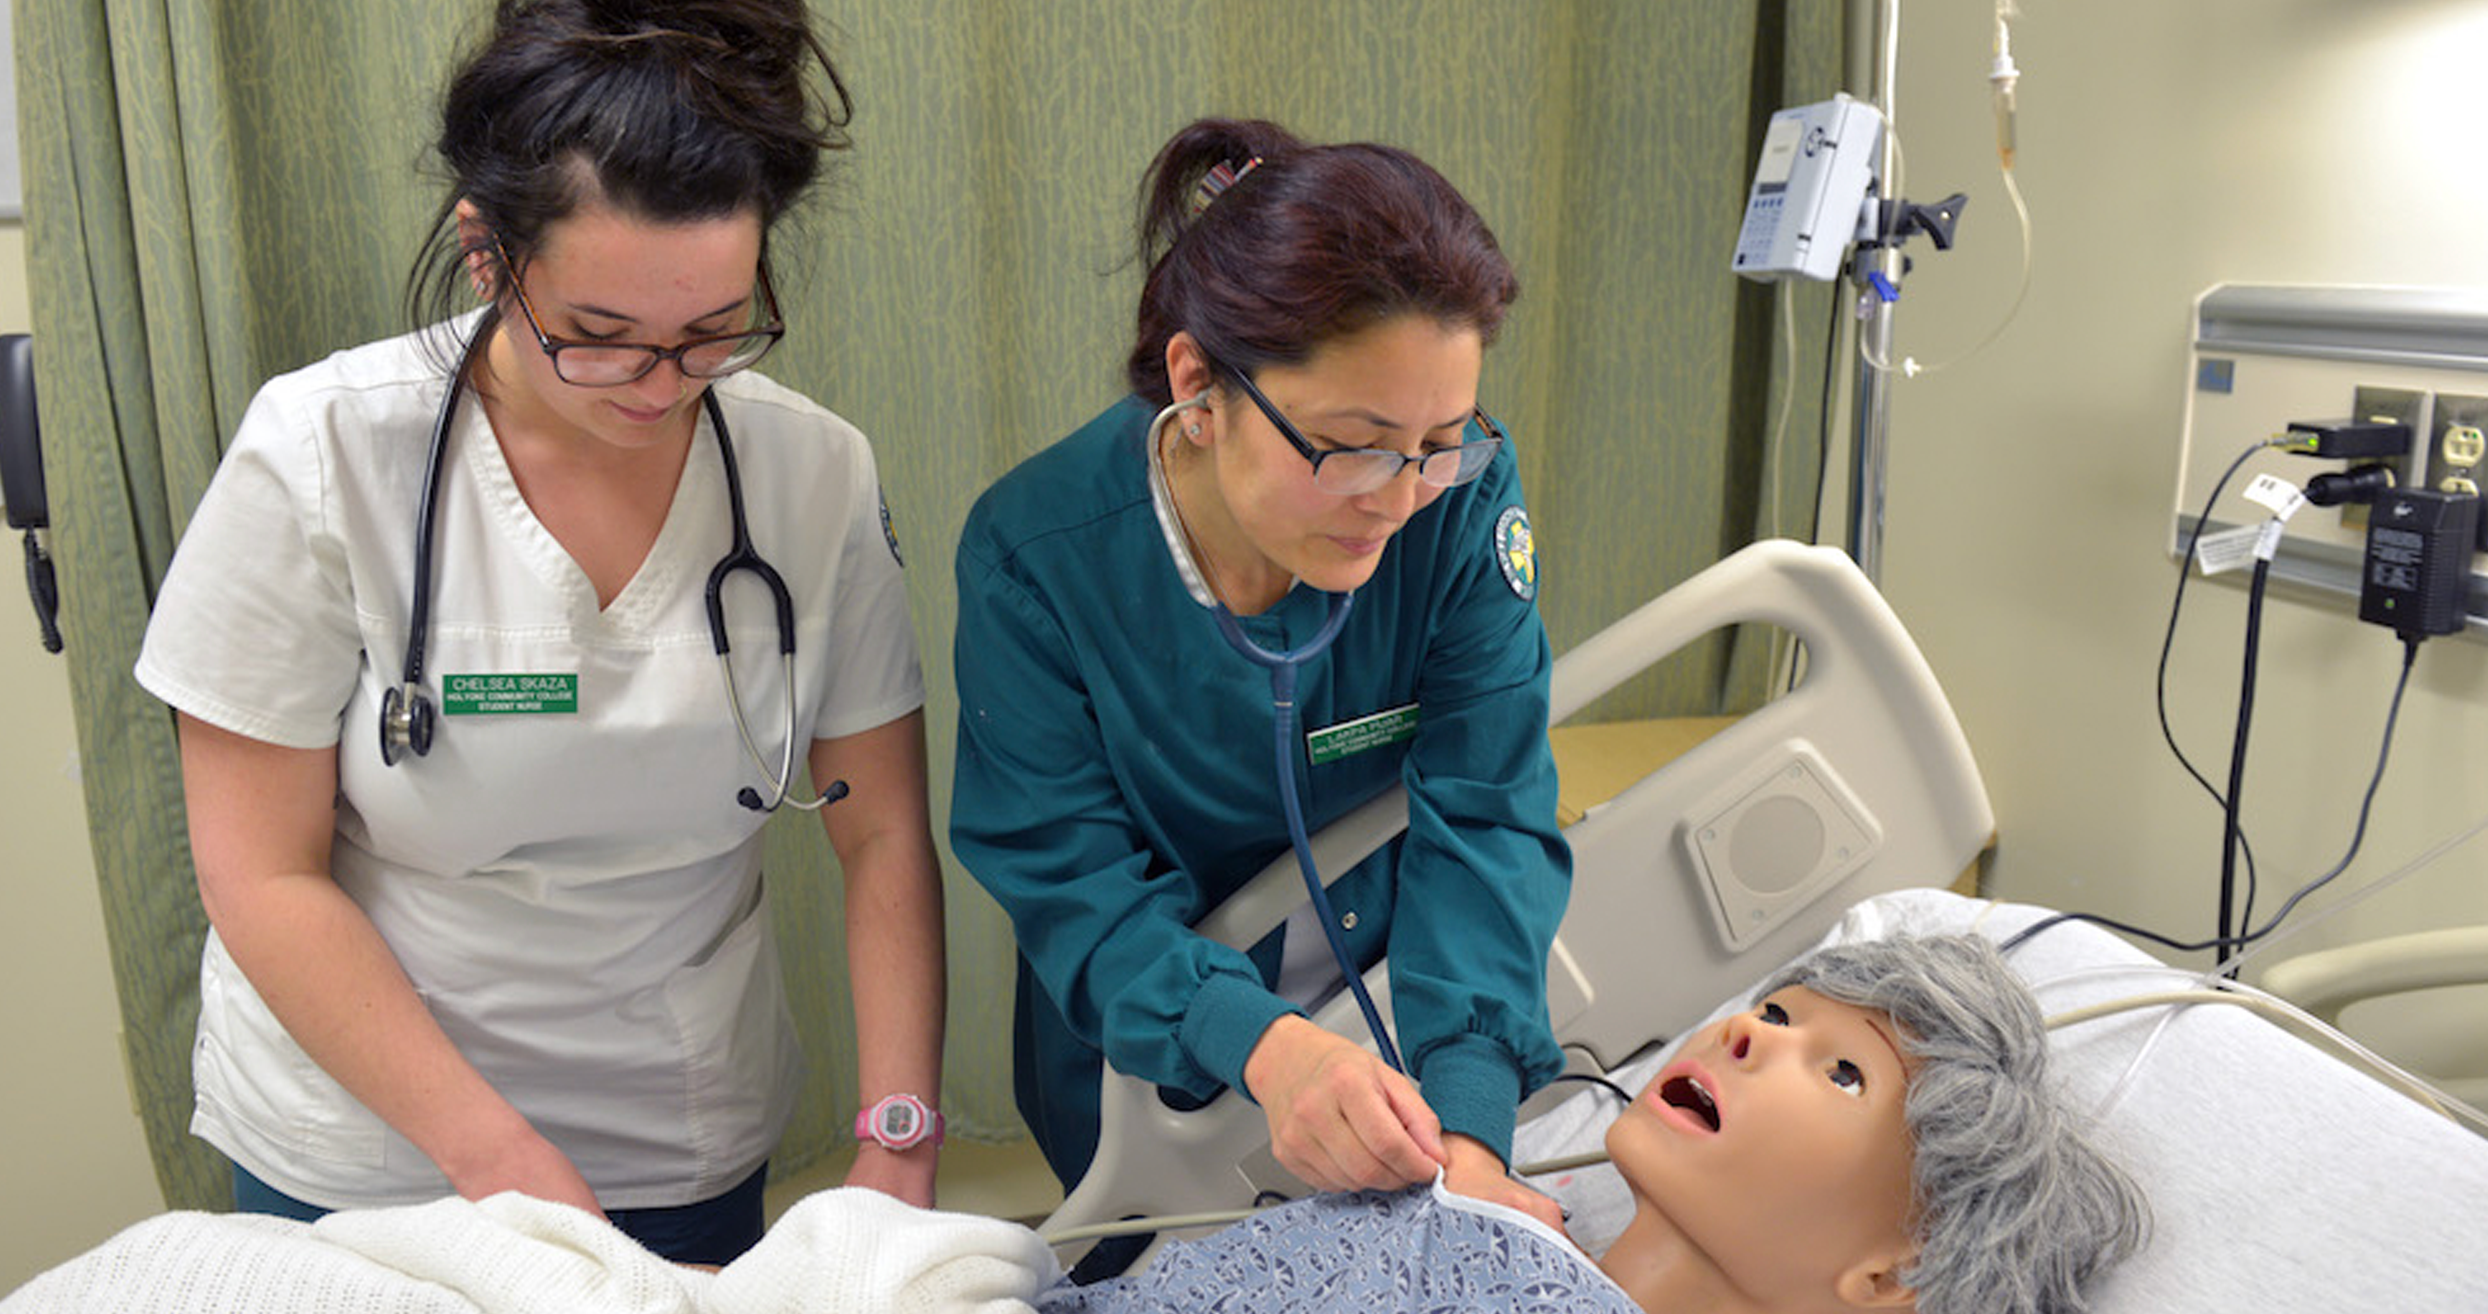 Two health students work with a patient simulator